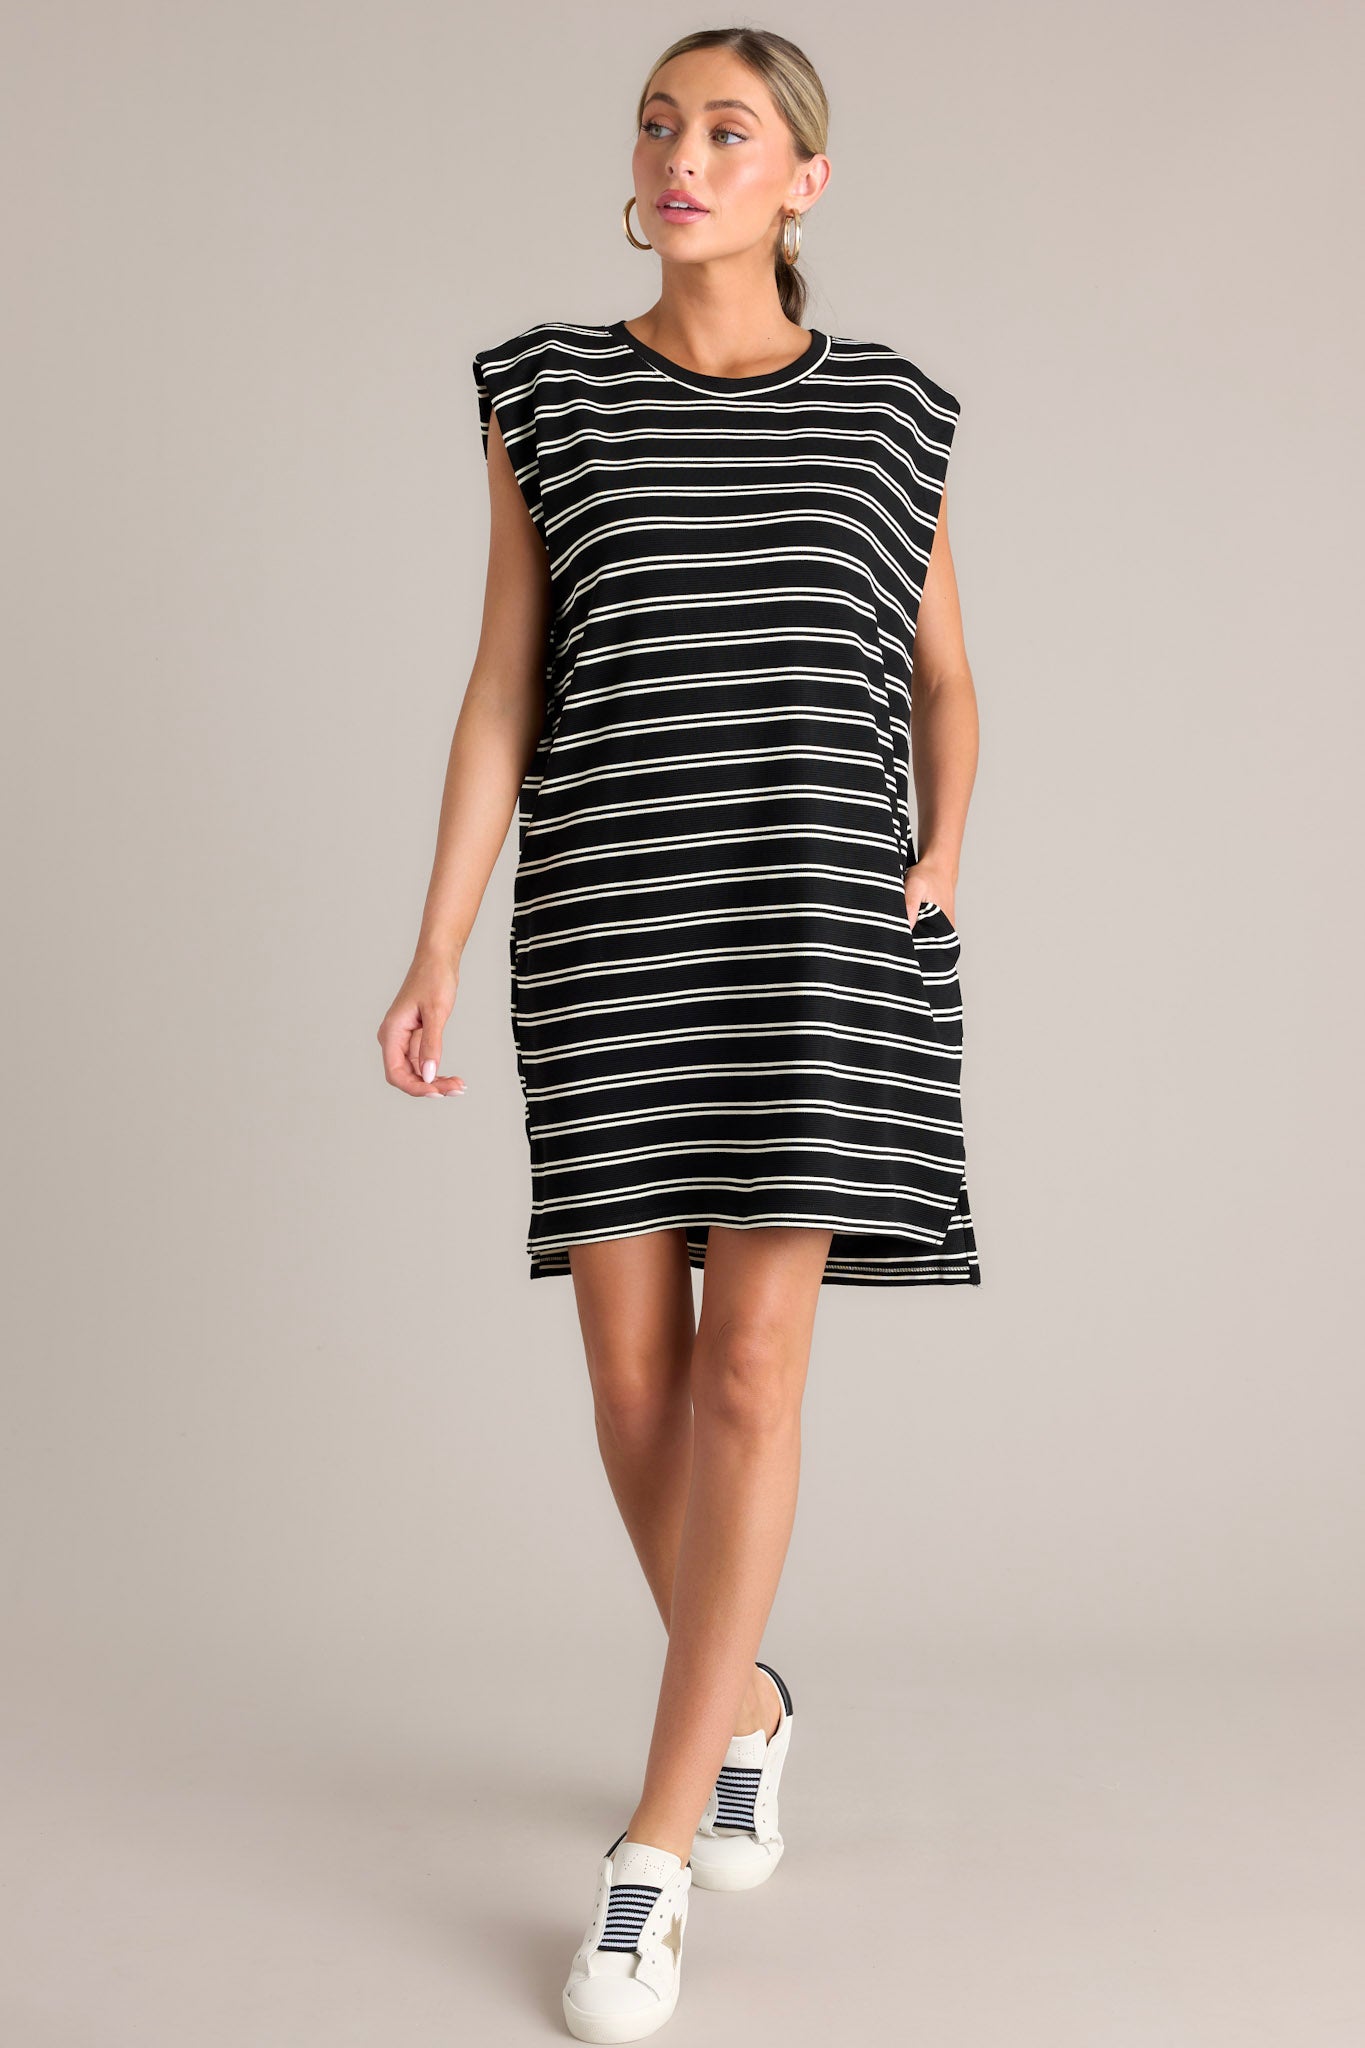 Full body angled view of this black stripe mini dress that features a crew neckline, short cap sleeves, a double stripe pattern, functional hip pockets, and a split hemline.